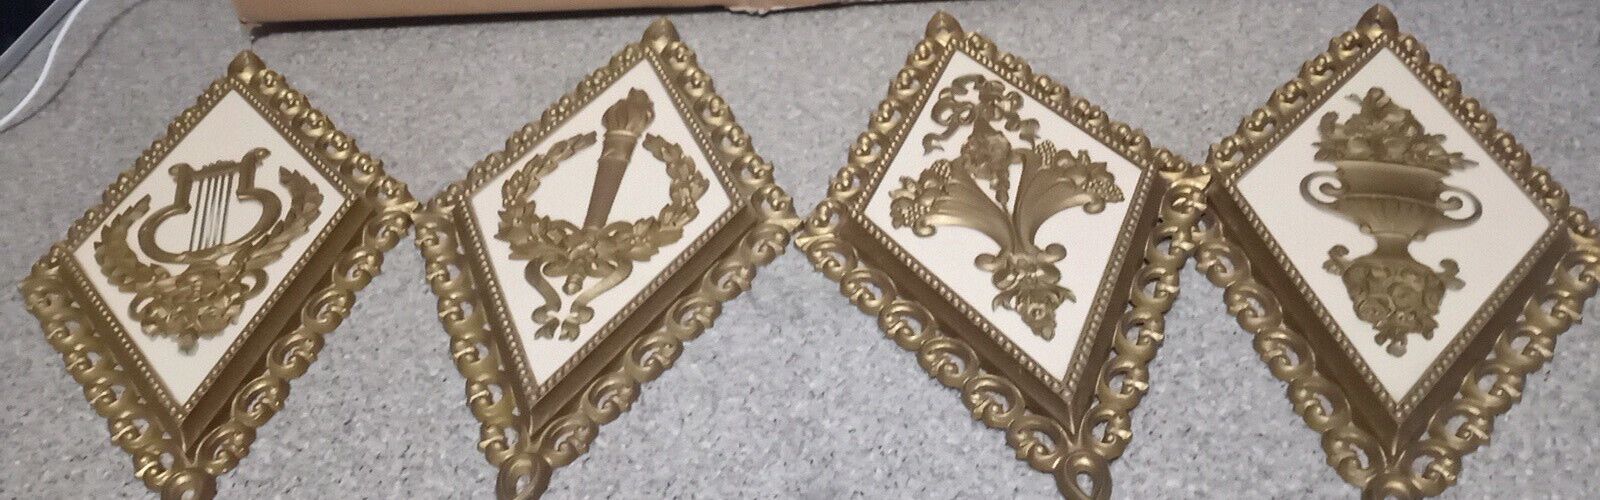 4 Vintage MCM Homco Syroco Gold Diamond Shape Wall Decor Plaques. Made in USA